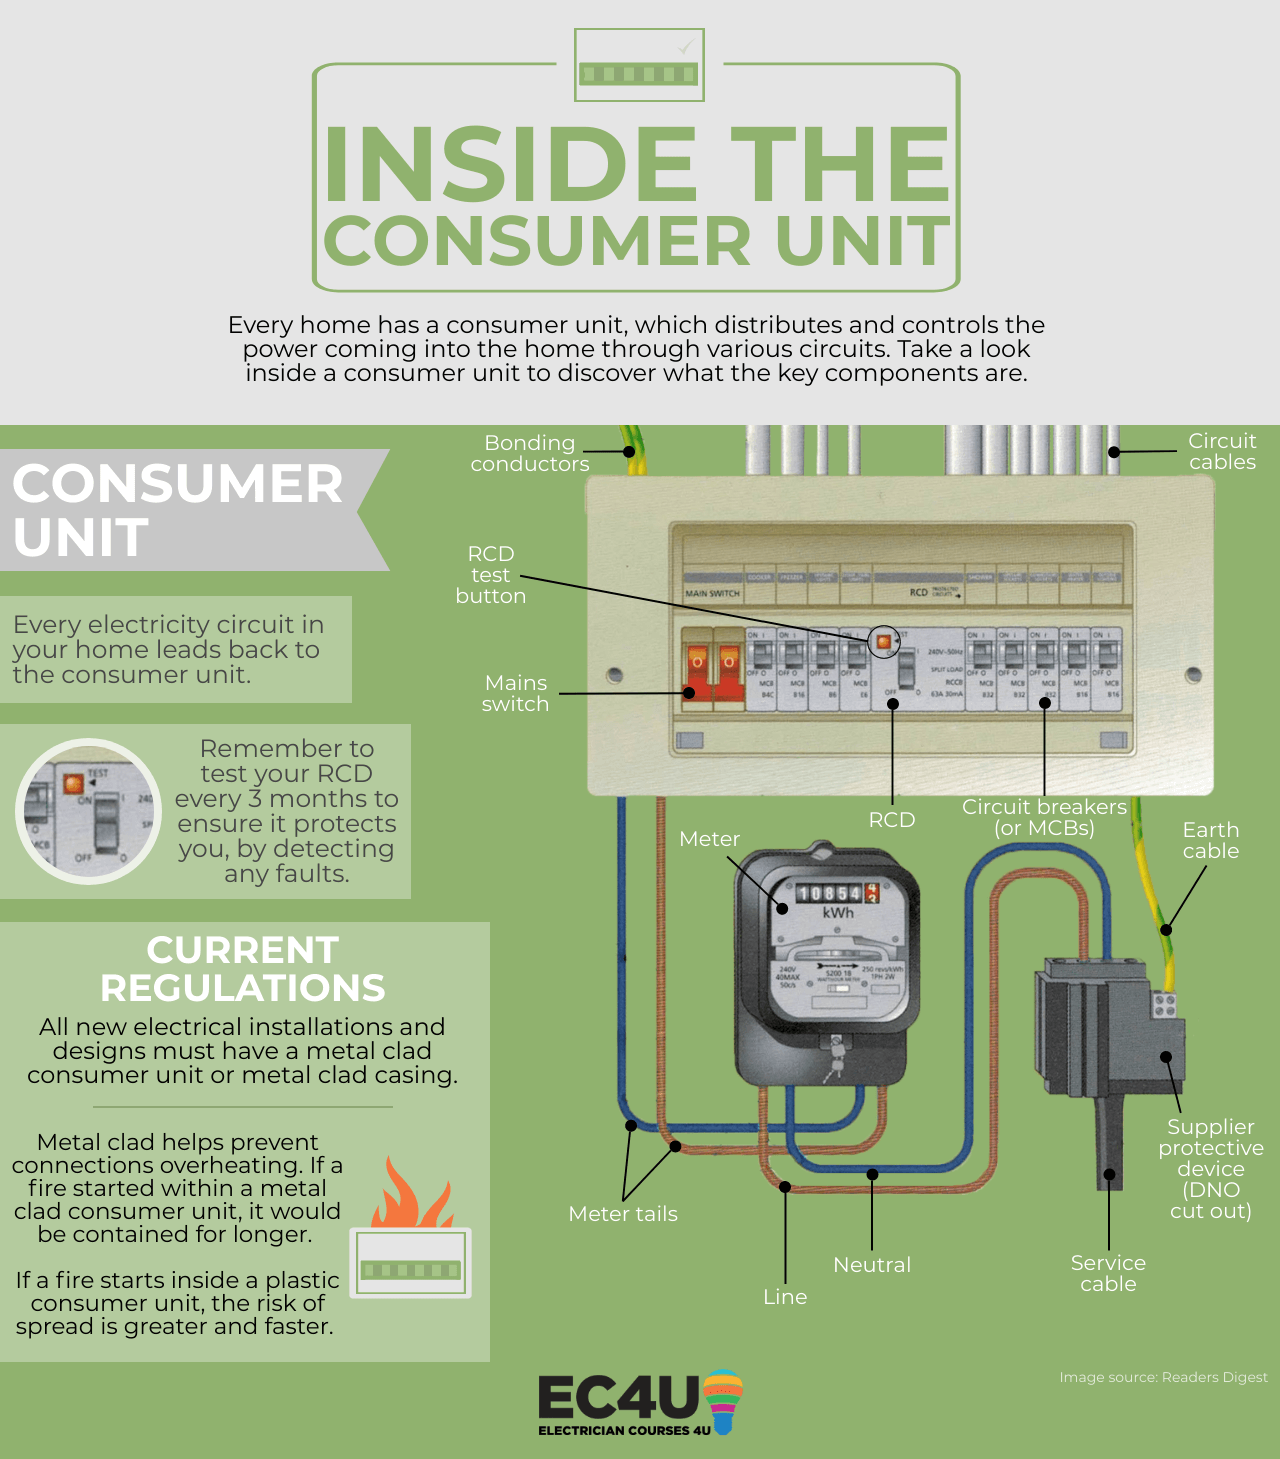 Inside the consumer unit infographic